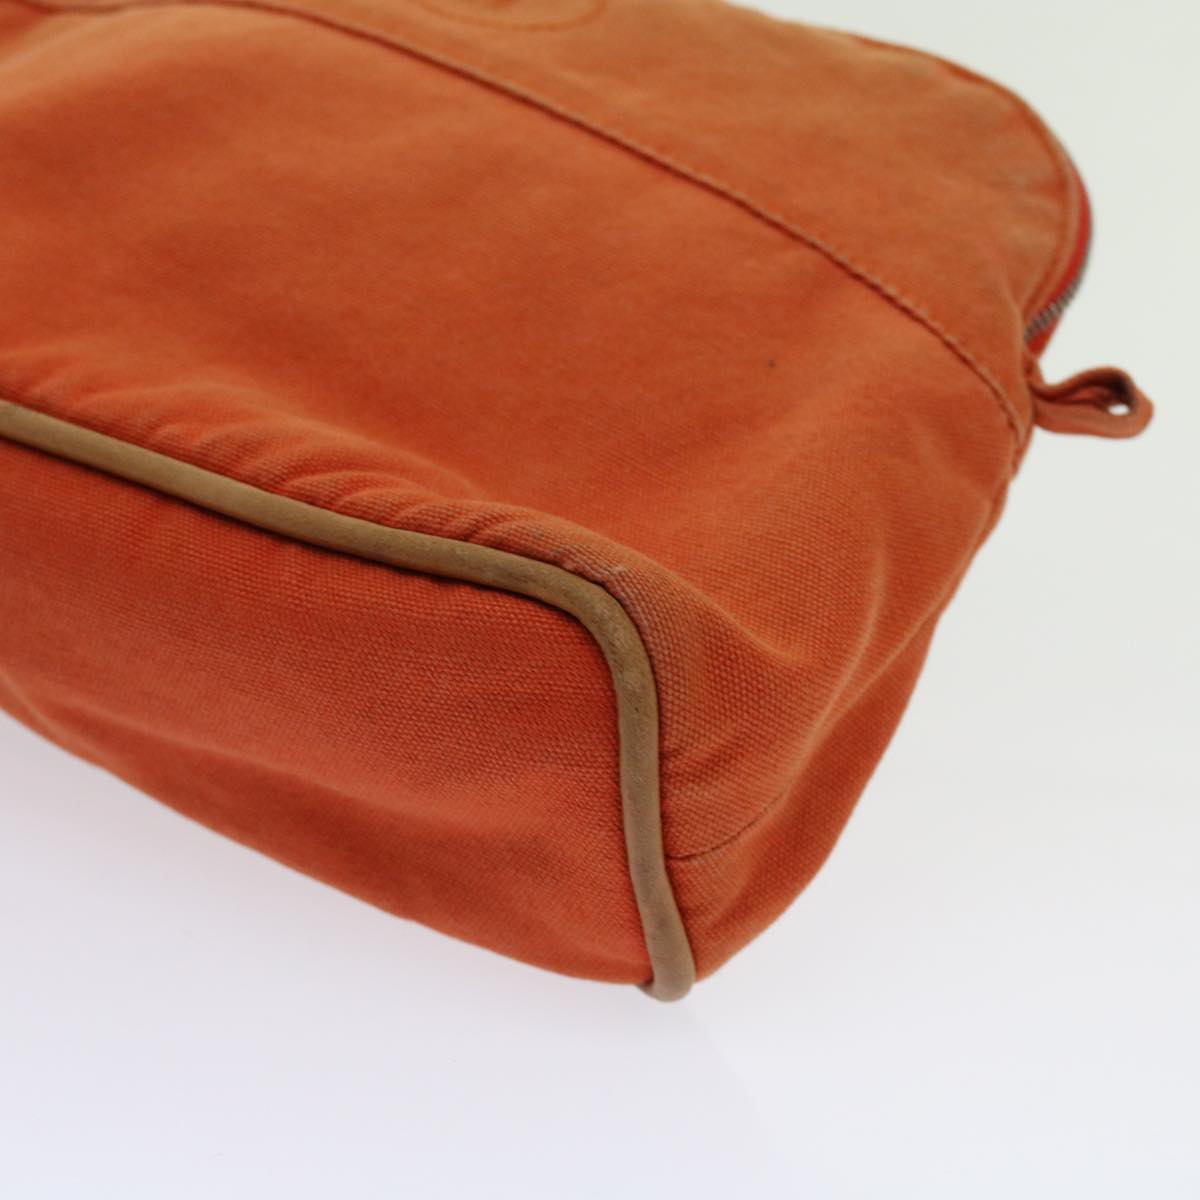 HERMES Bolide Pouch Canvas Orange Auth 62680